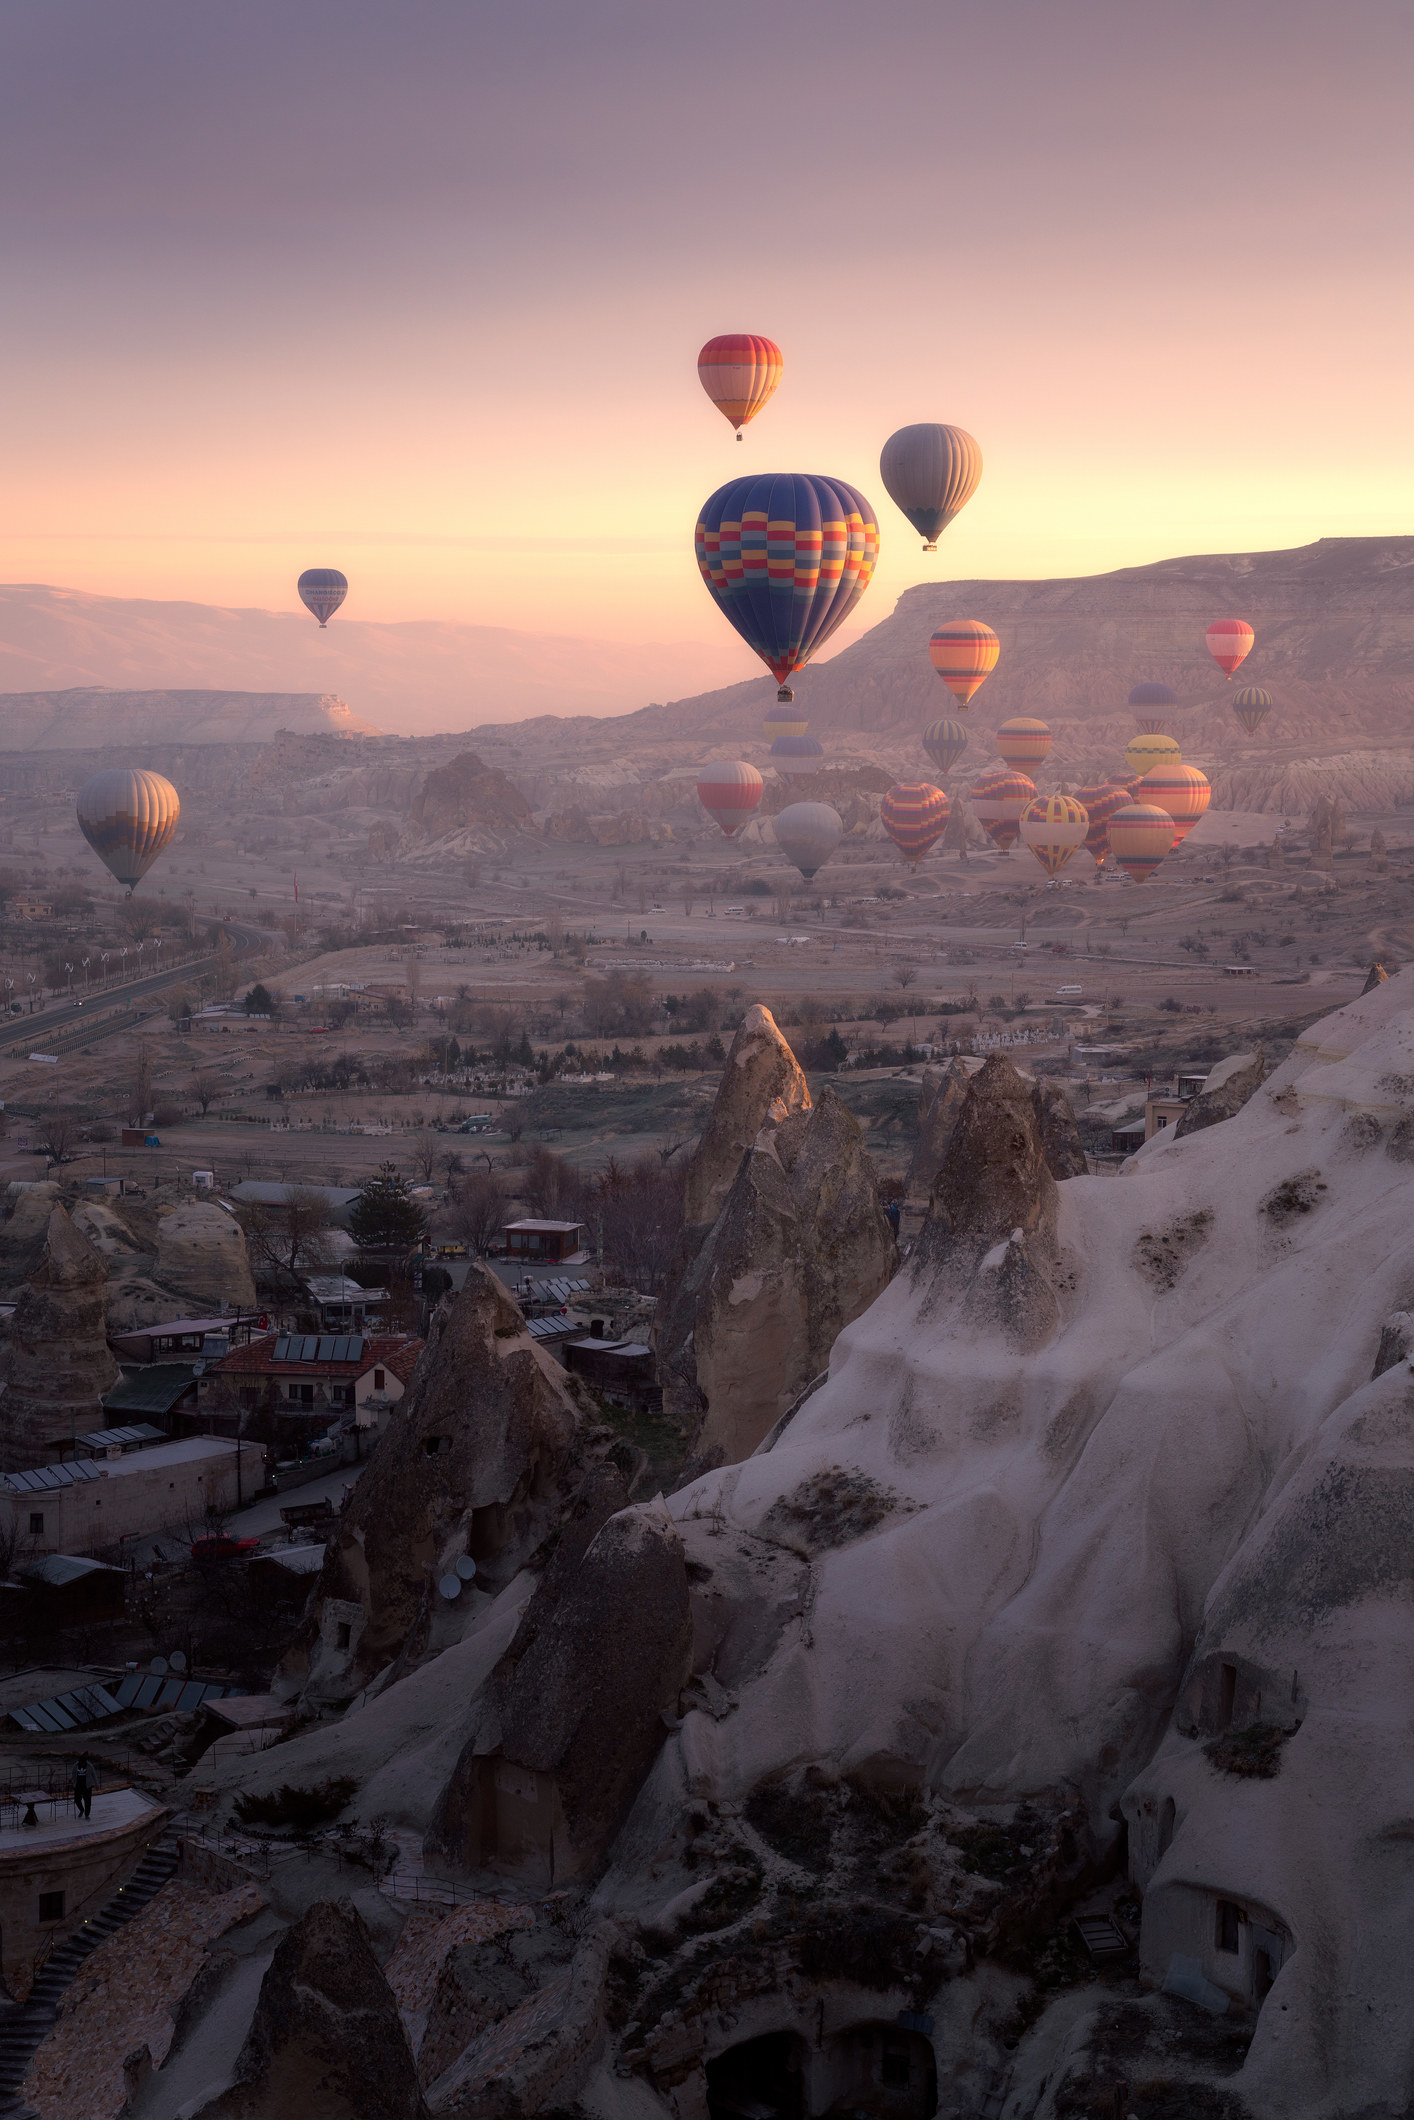 Hot air balloons in the sky of Göreme, Turkey at sunrise.